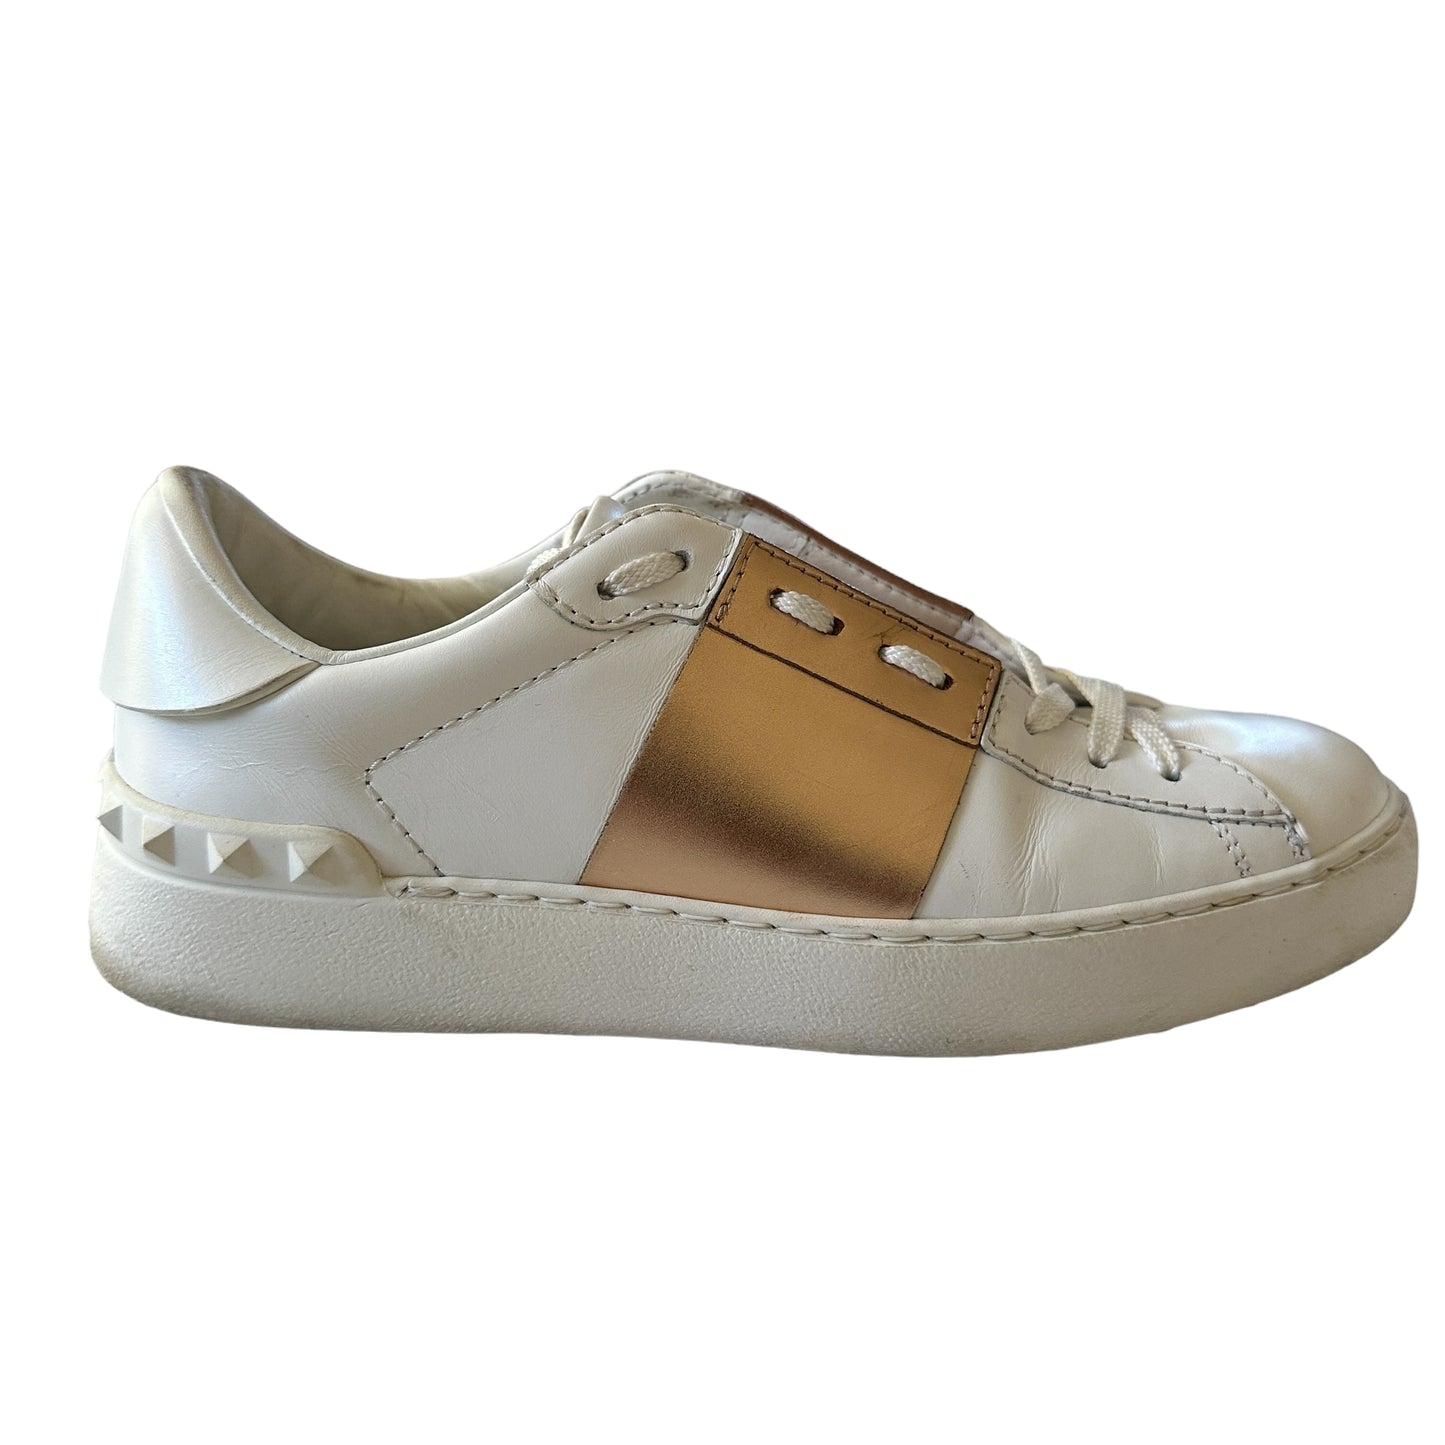 White / Rose Gold Sneakers - 7.5